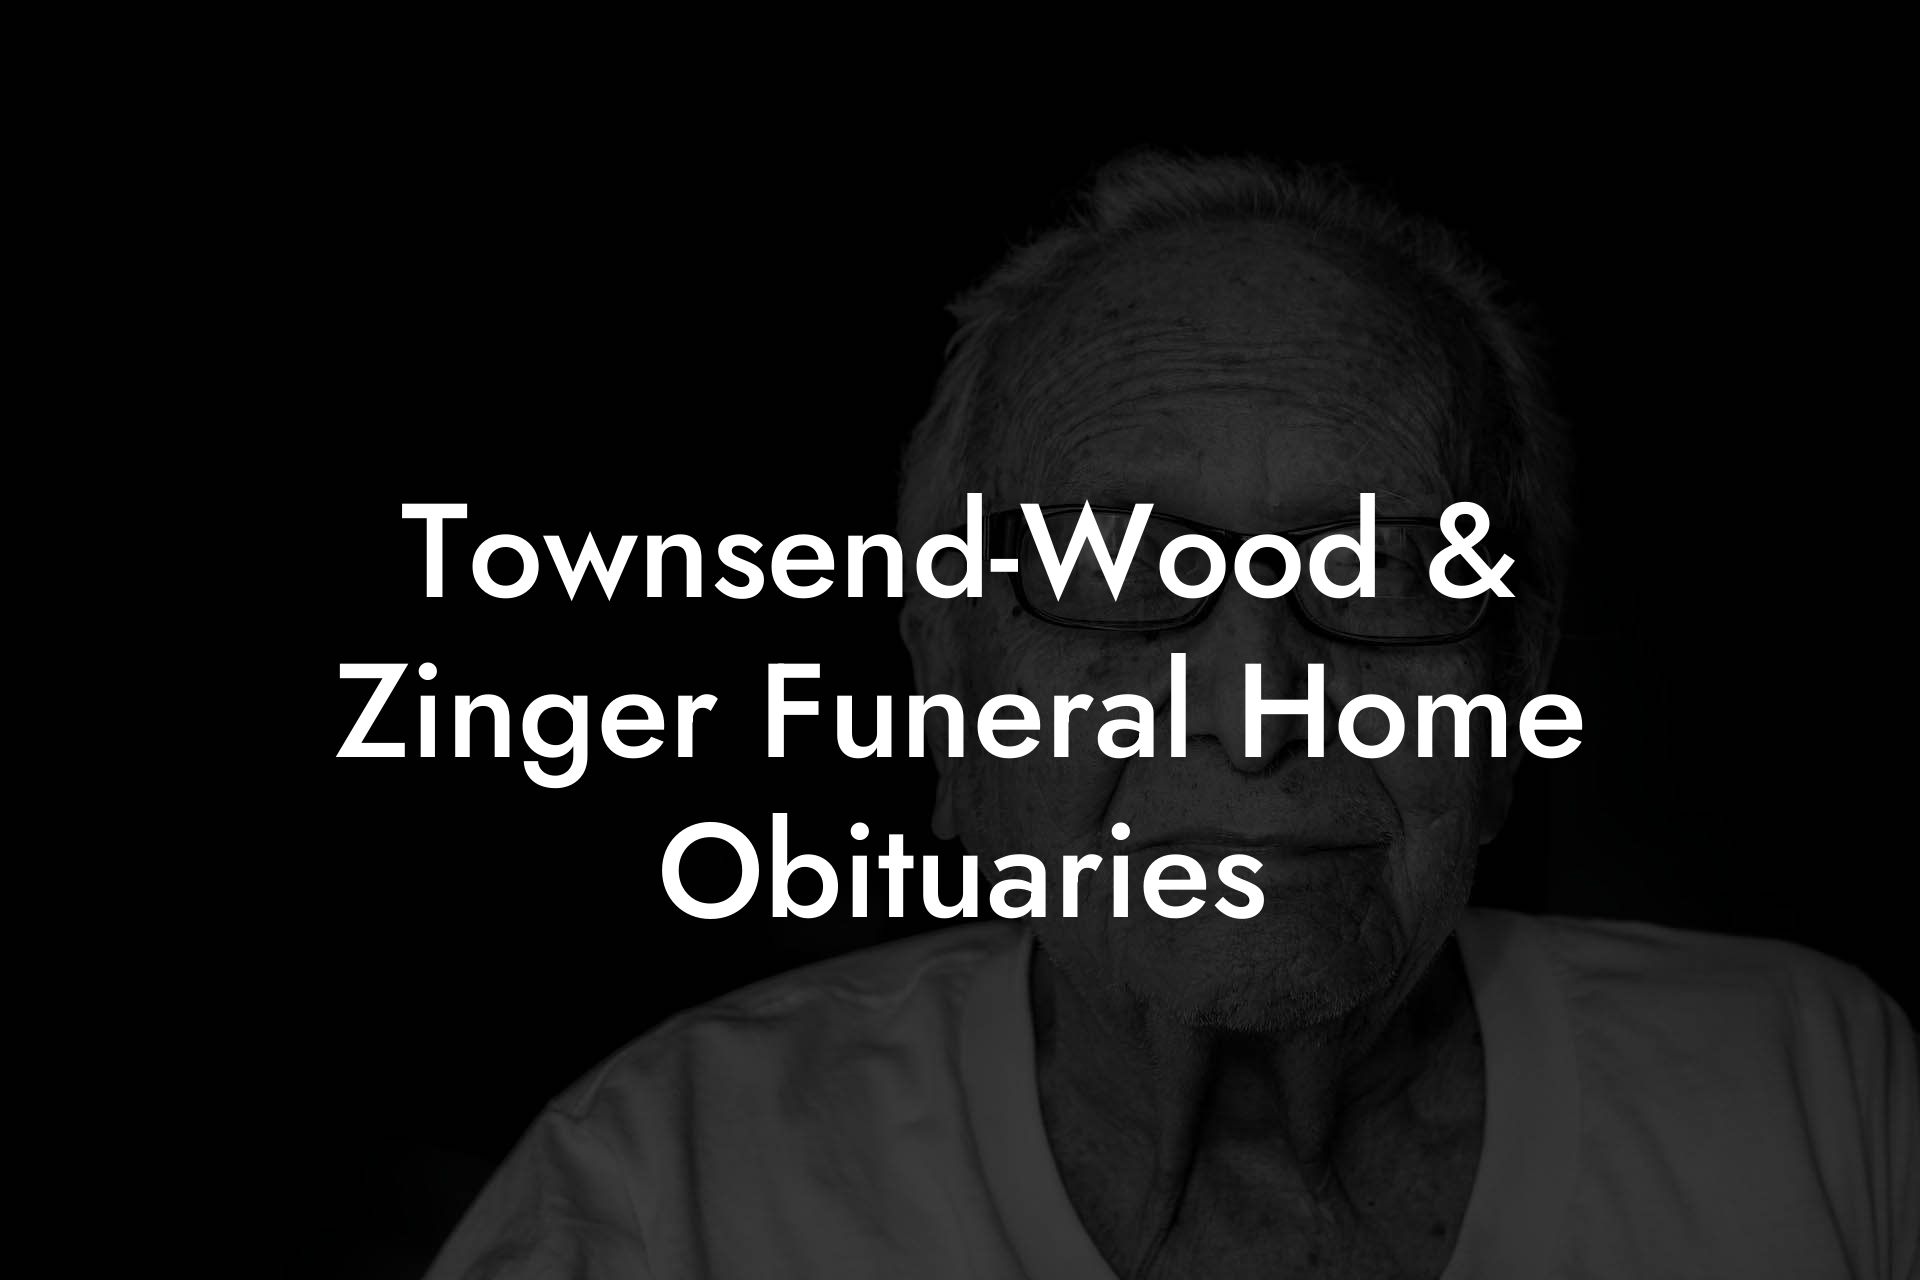 Townsend-Wood & Zinger Funeral Home Obituaries